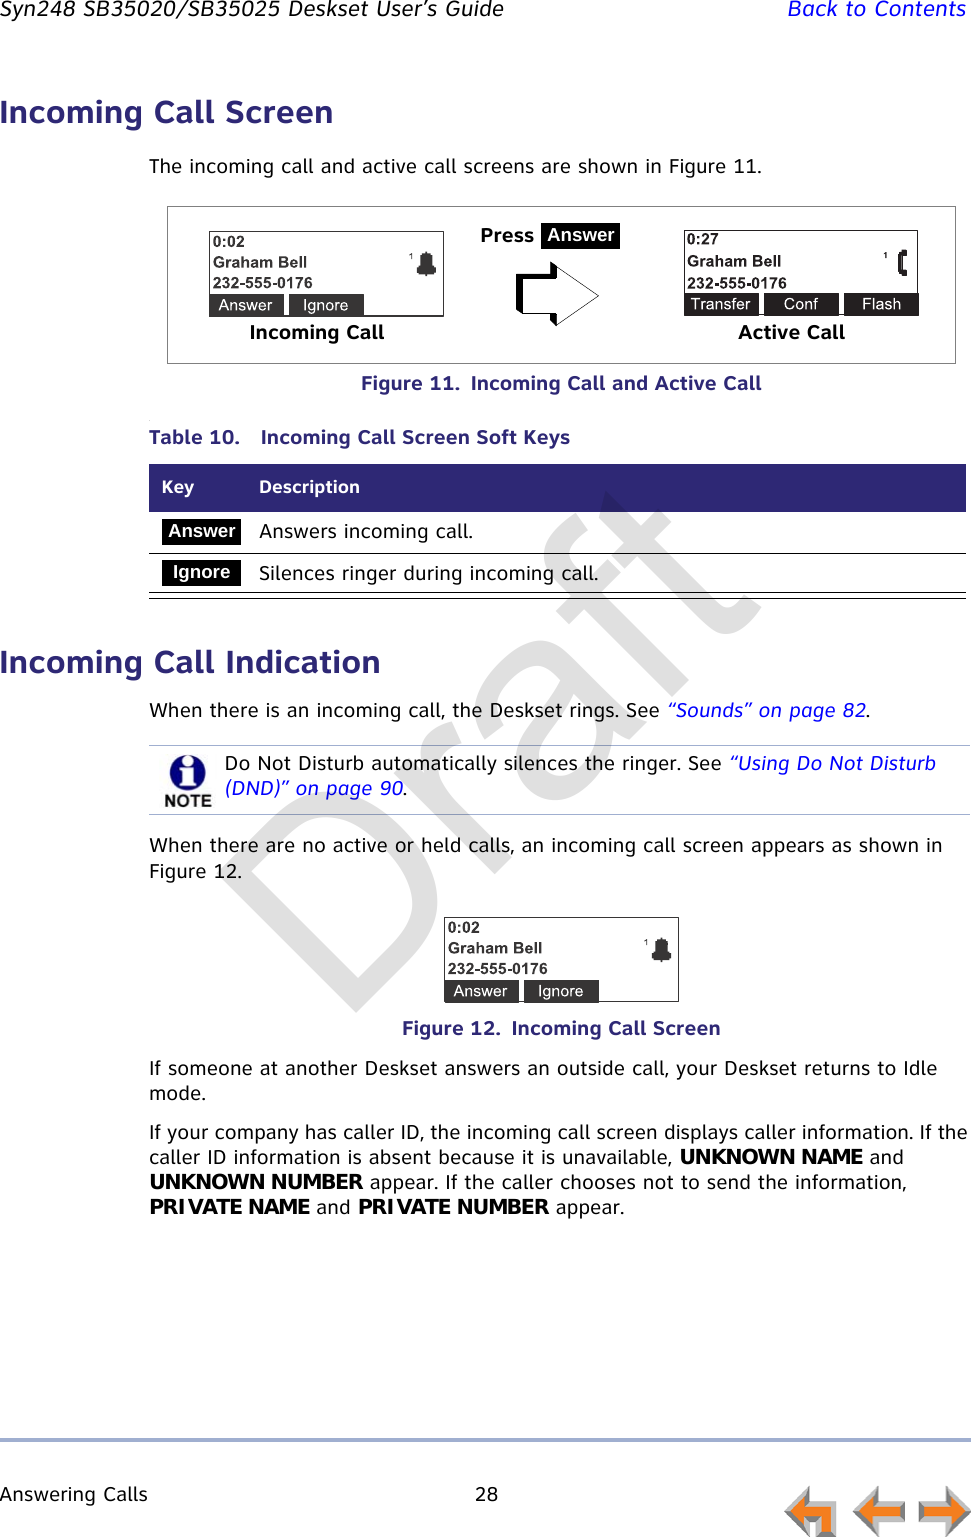 Answering Calls 28         Syn248 SB35020/SB35025 Deskset User’s Guide Back to ContentsIncoming Call ScreenThe incoming call and active call screens are shown in Figure 11.Figure 11.  Incoming Call and Active Call.Incoming Call IndicationWhen there is an incoming call, the Deskset rings. See “Sounds” on page 82.When there are no active or held calls, an incoming call screen appears as shown in Figure 12.Figure 12.  Incoming Call ScreenIf someone at another Deskset answers an outside call, your Deskset returns to Idle mode.If your company has caller ID, the incoming call screen displays caller information. If the caller ID information is absent because it is unavailable, UNKNOWN NAME and UNKNOWN NUMBER appear. If the caller chooses not to send the information, PRIVATE NAME and PRIVATE NUMBER appear.Table 10.  Incoming Call Screen Soft KeysKey  DescriptionAnswers incoming call.Silences ringer during incoming call.Press AnswerIncoming Call Active CallAnswerIgnoreDo Not Disturb automatically silences the ringer. See “Using Do Not Disturb (DND)” on page 90.Draft